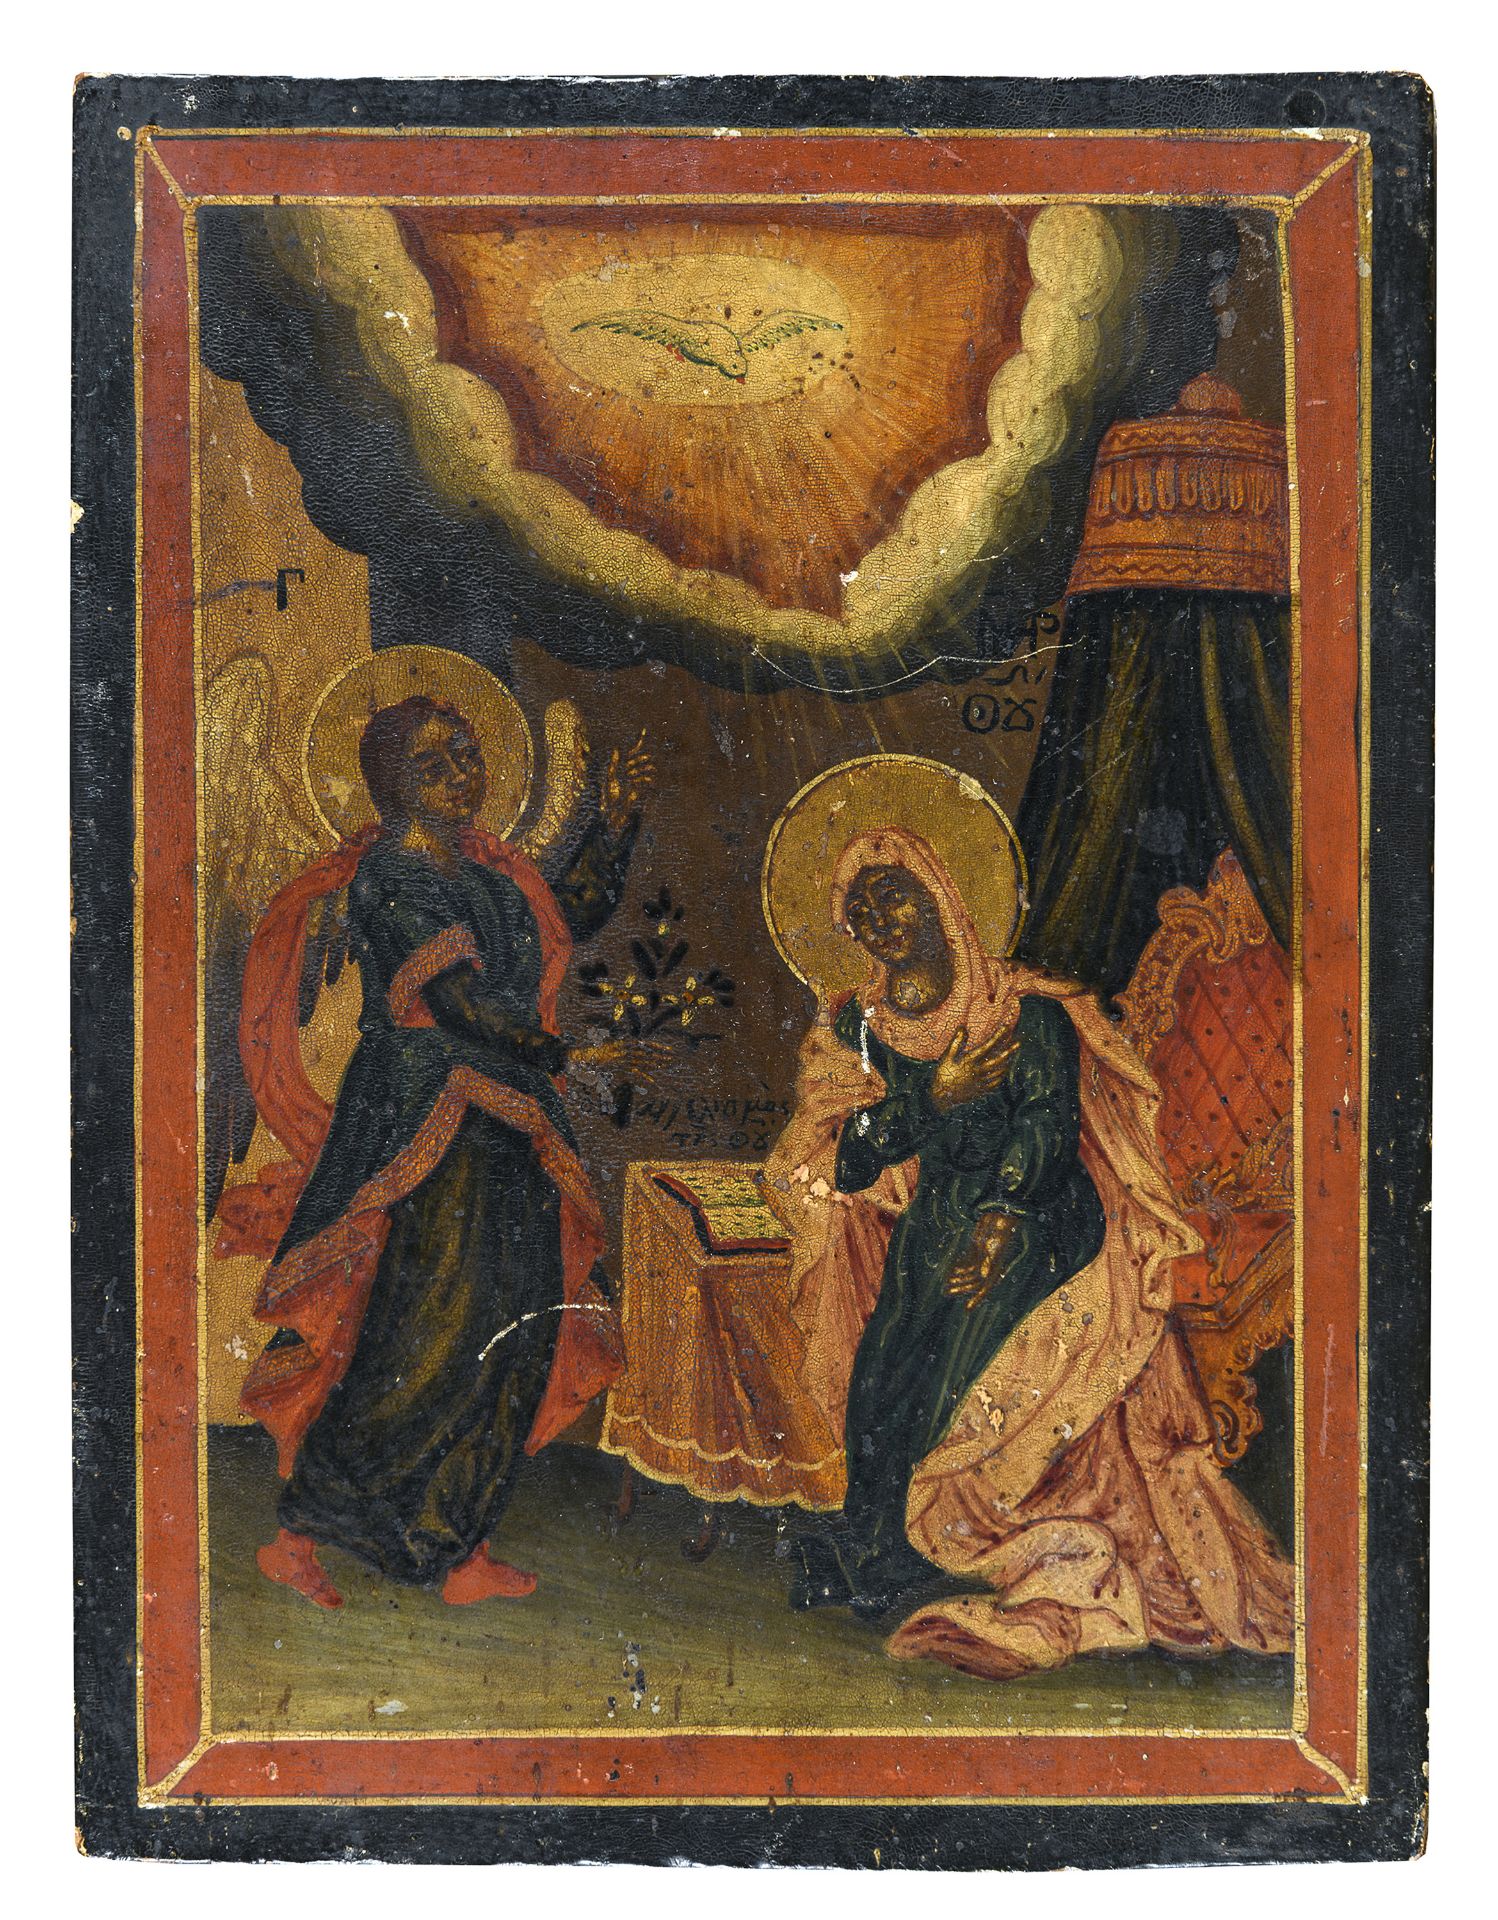 RUSSIAN OIL ICON END OF THE 18TH CENTURY